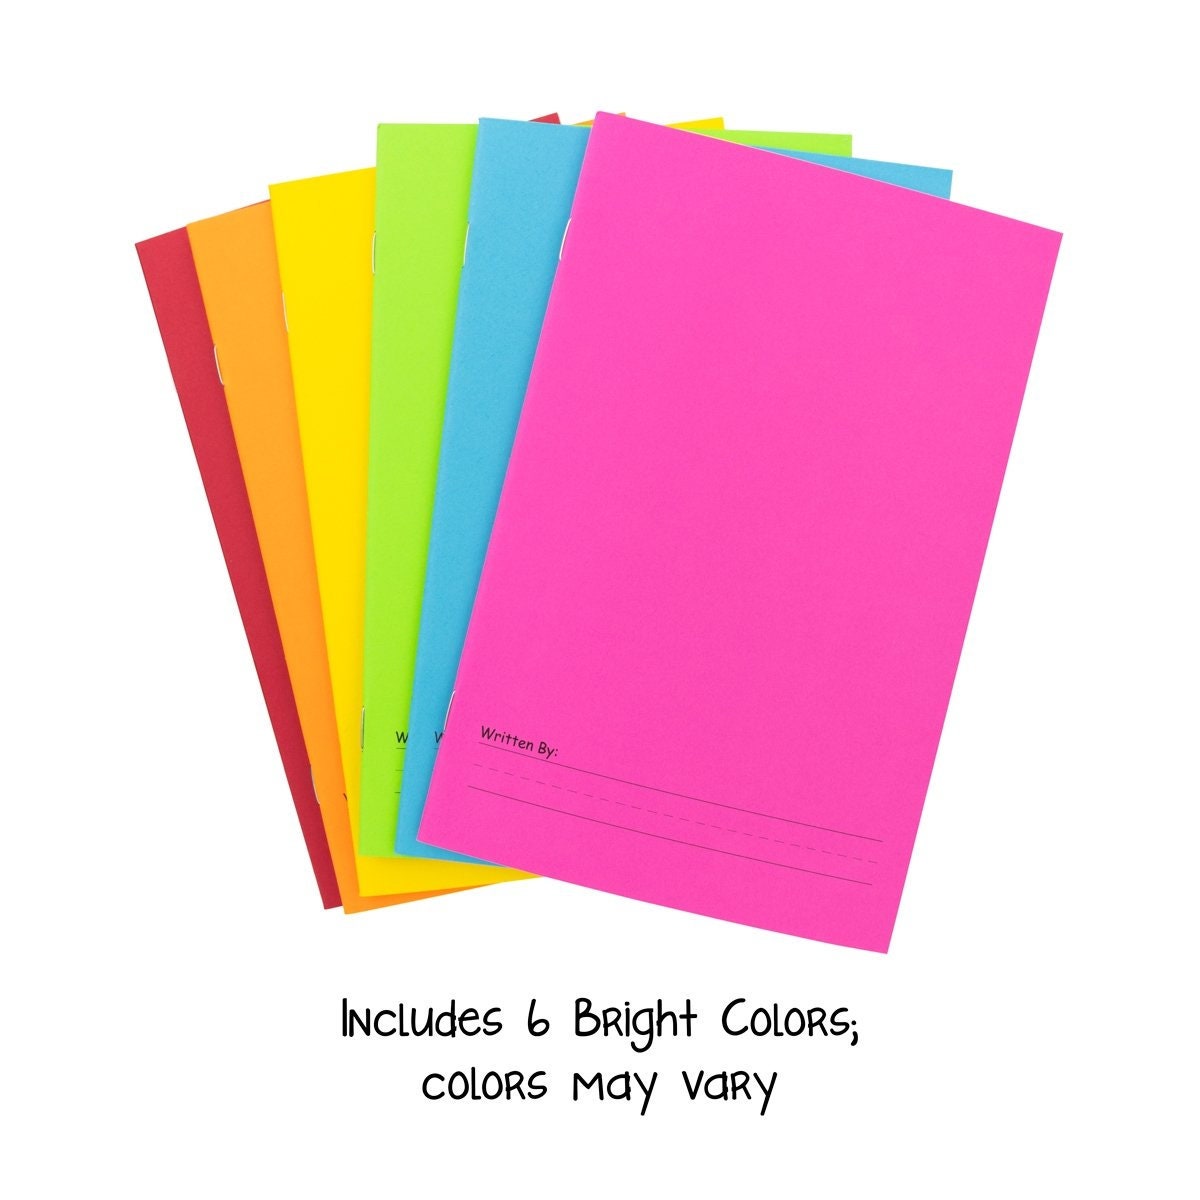 Hygloss Blank Story Books for Kids, 5.5 x 8.5, Soft Cover in 6 Bright Colors, 24 Pages E